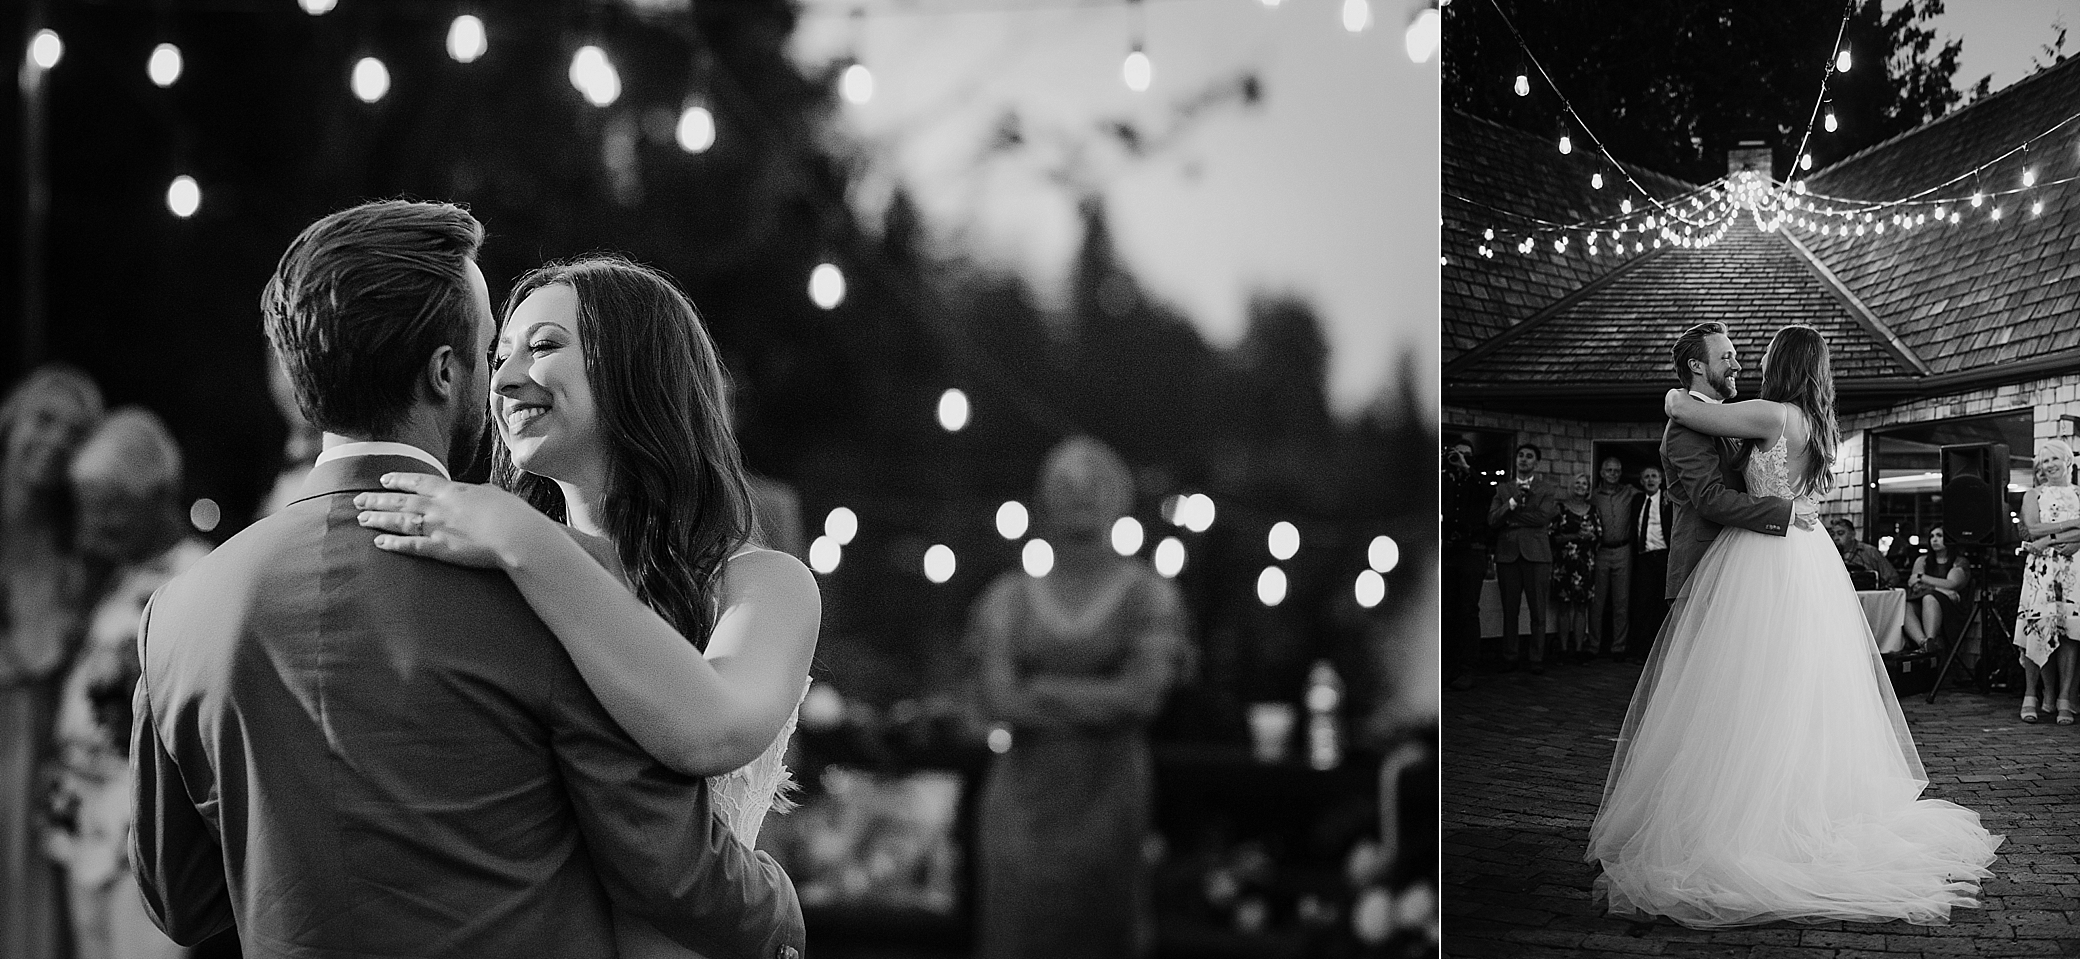 Bride and groom first dance at backyard wedding reception photographed by Seattle intimate wedding photographer, Megan Montalvo Photography